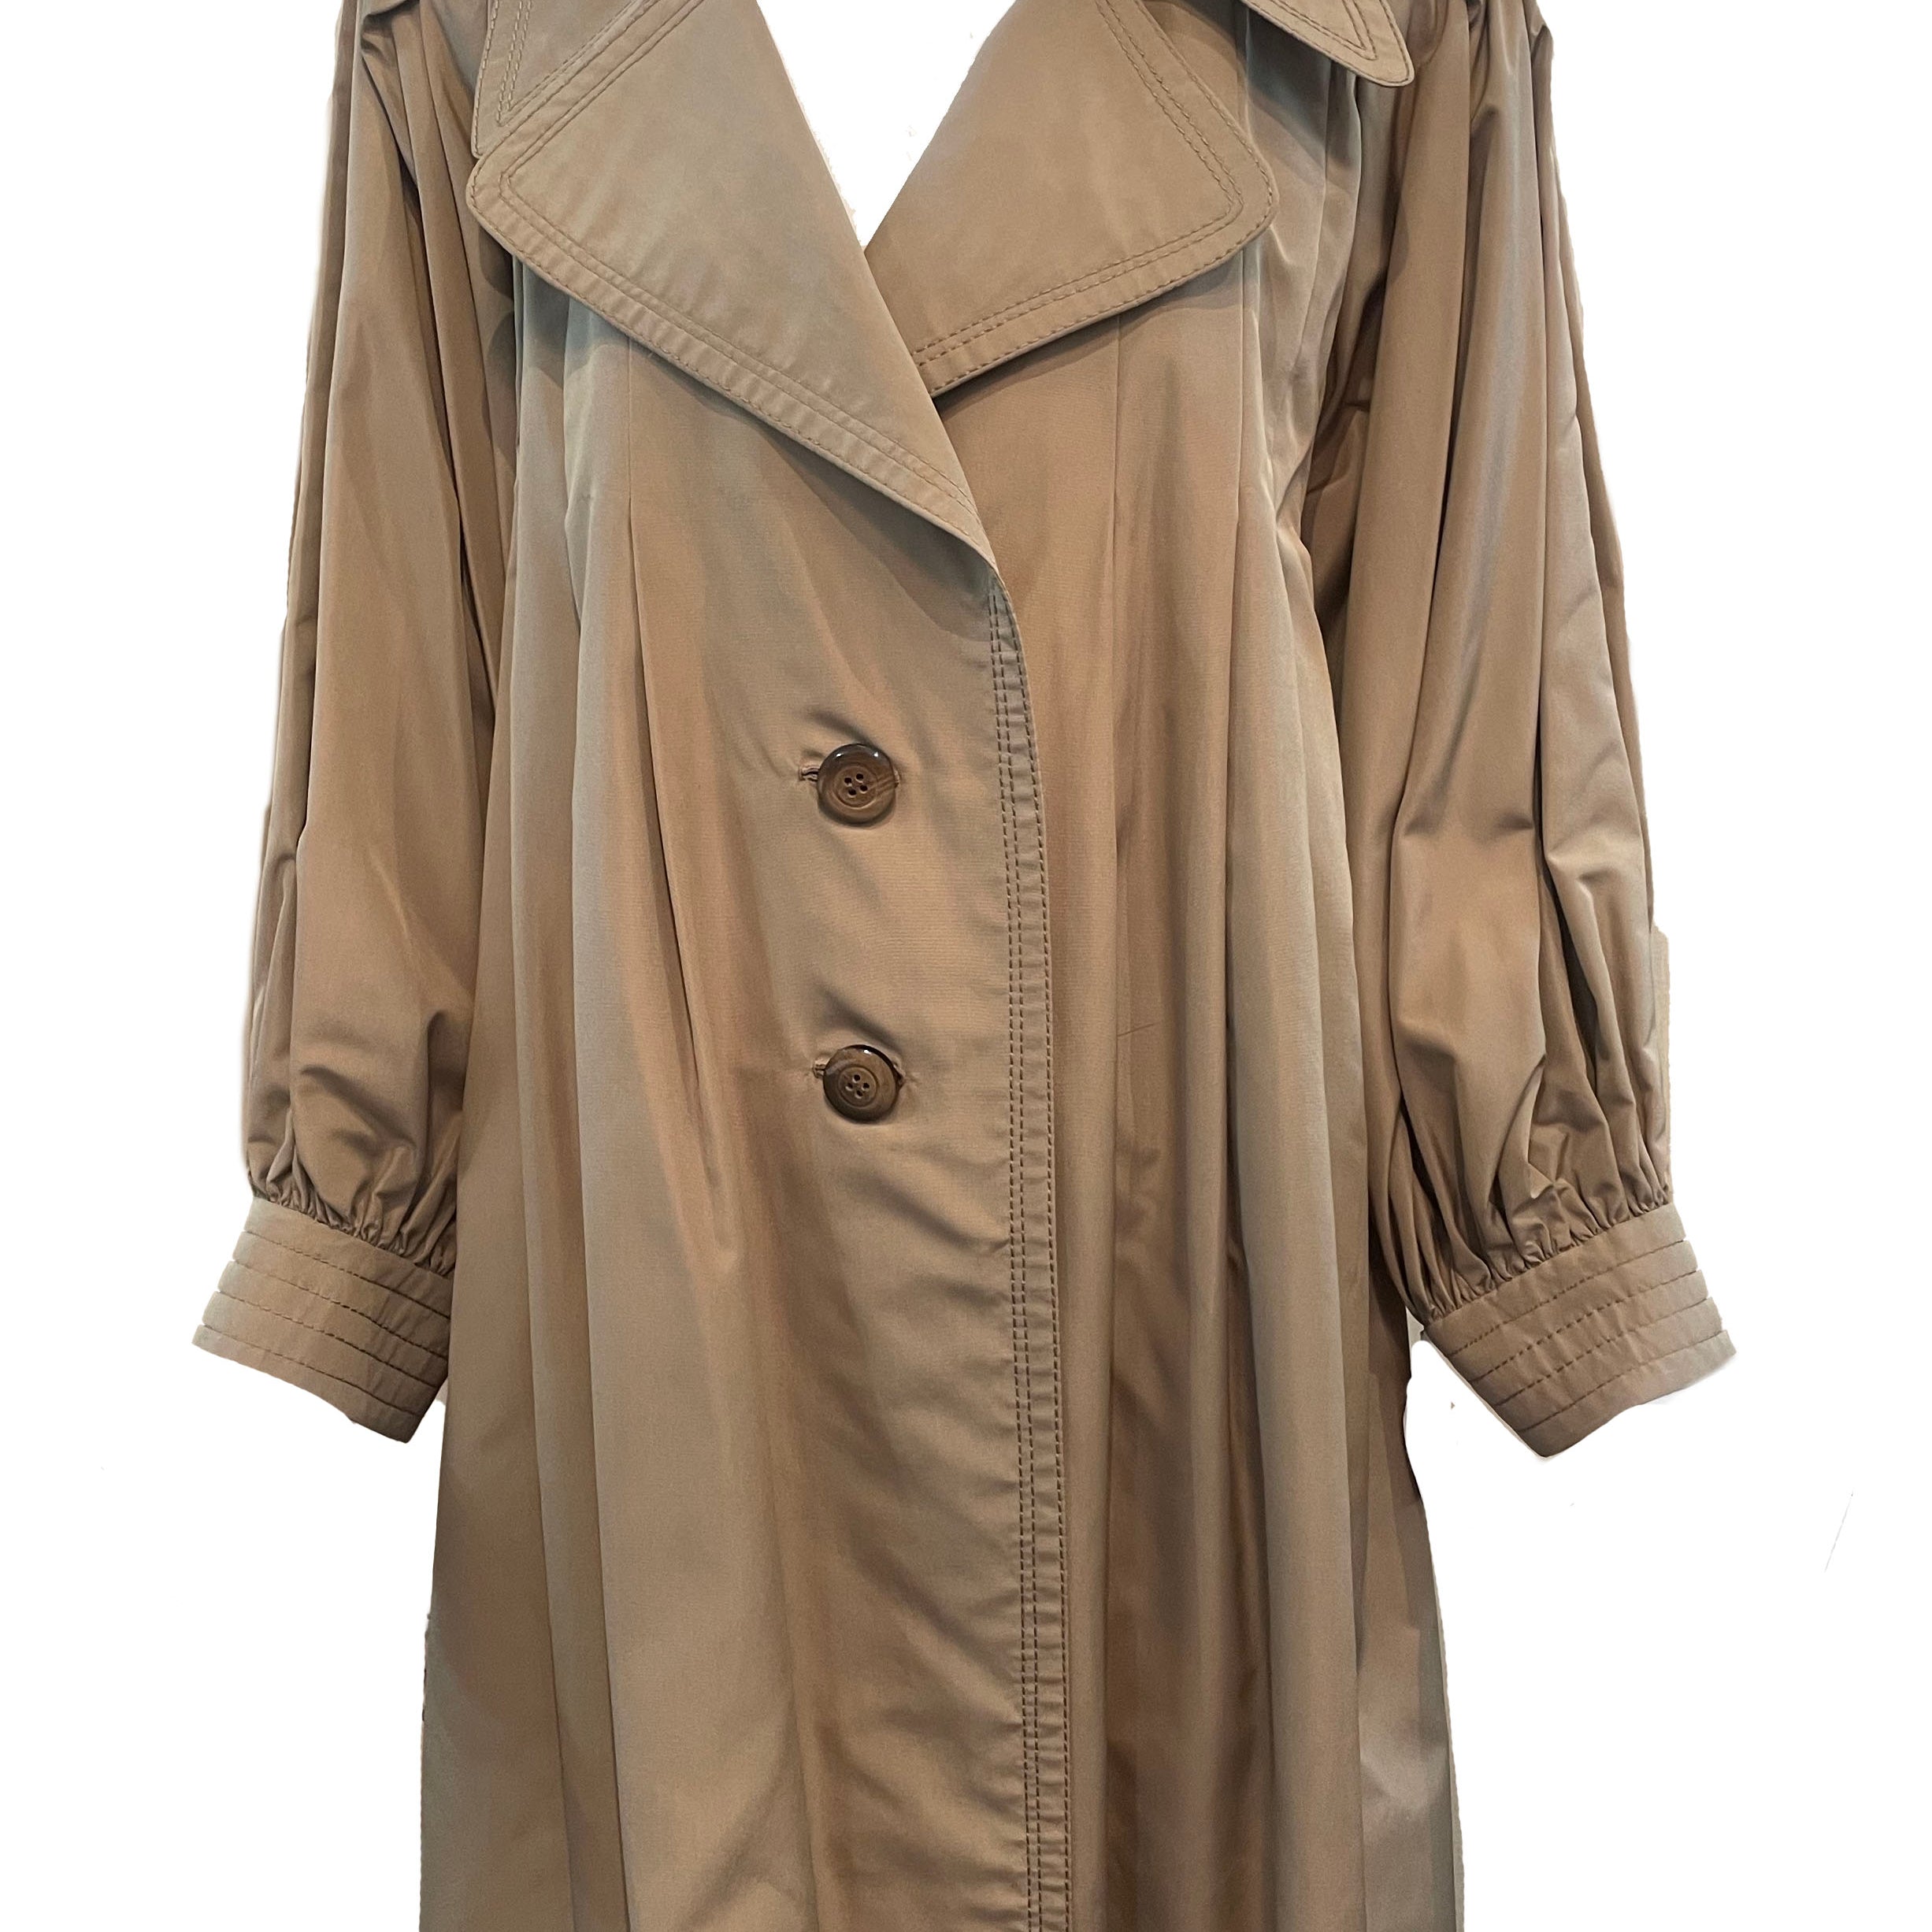 Galanos 80s Tan Oversized Trench Coat FRONT 1 of 5